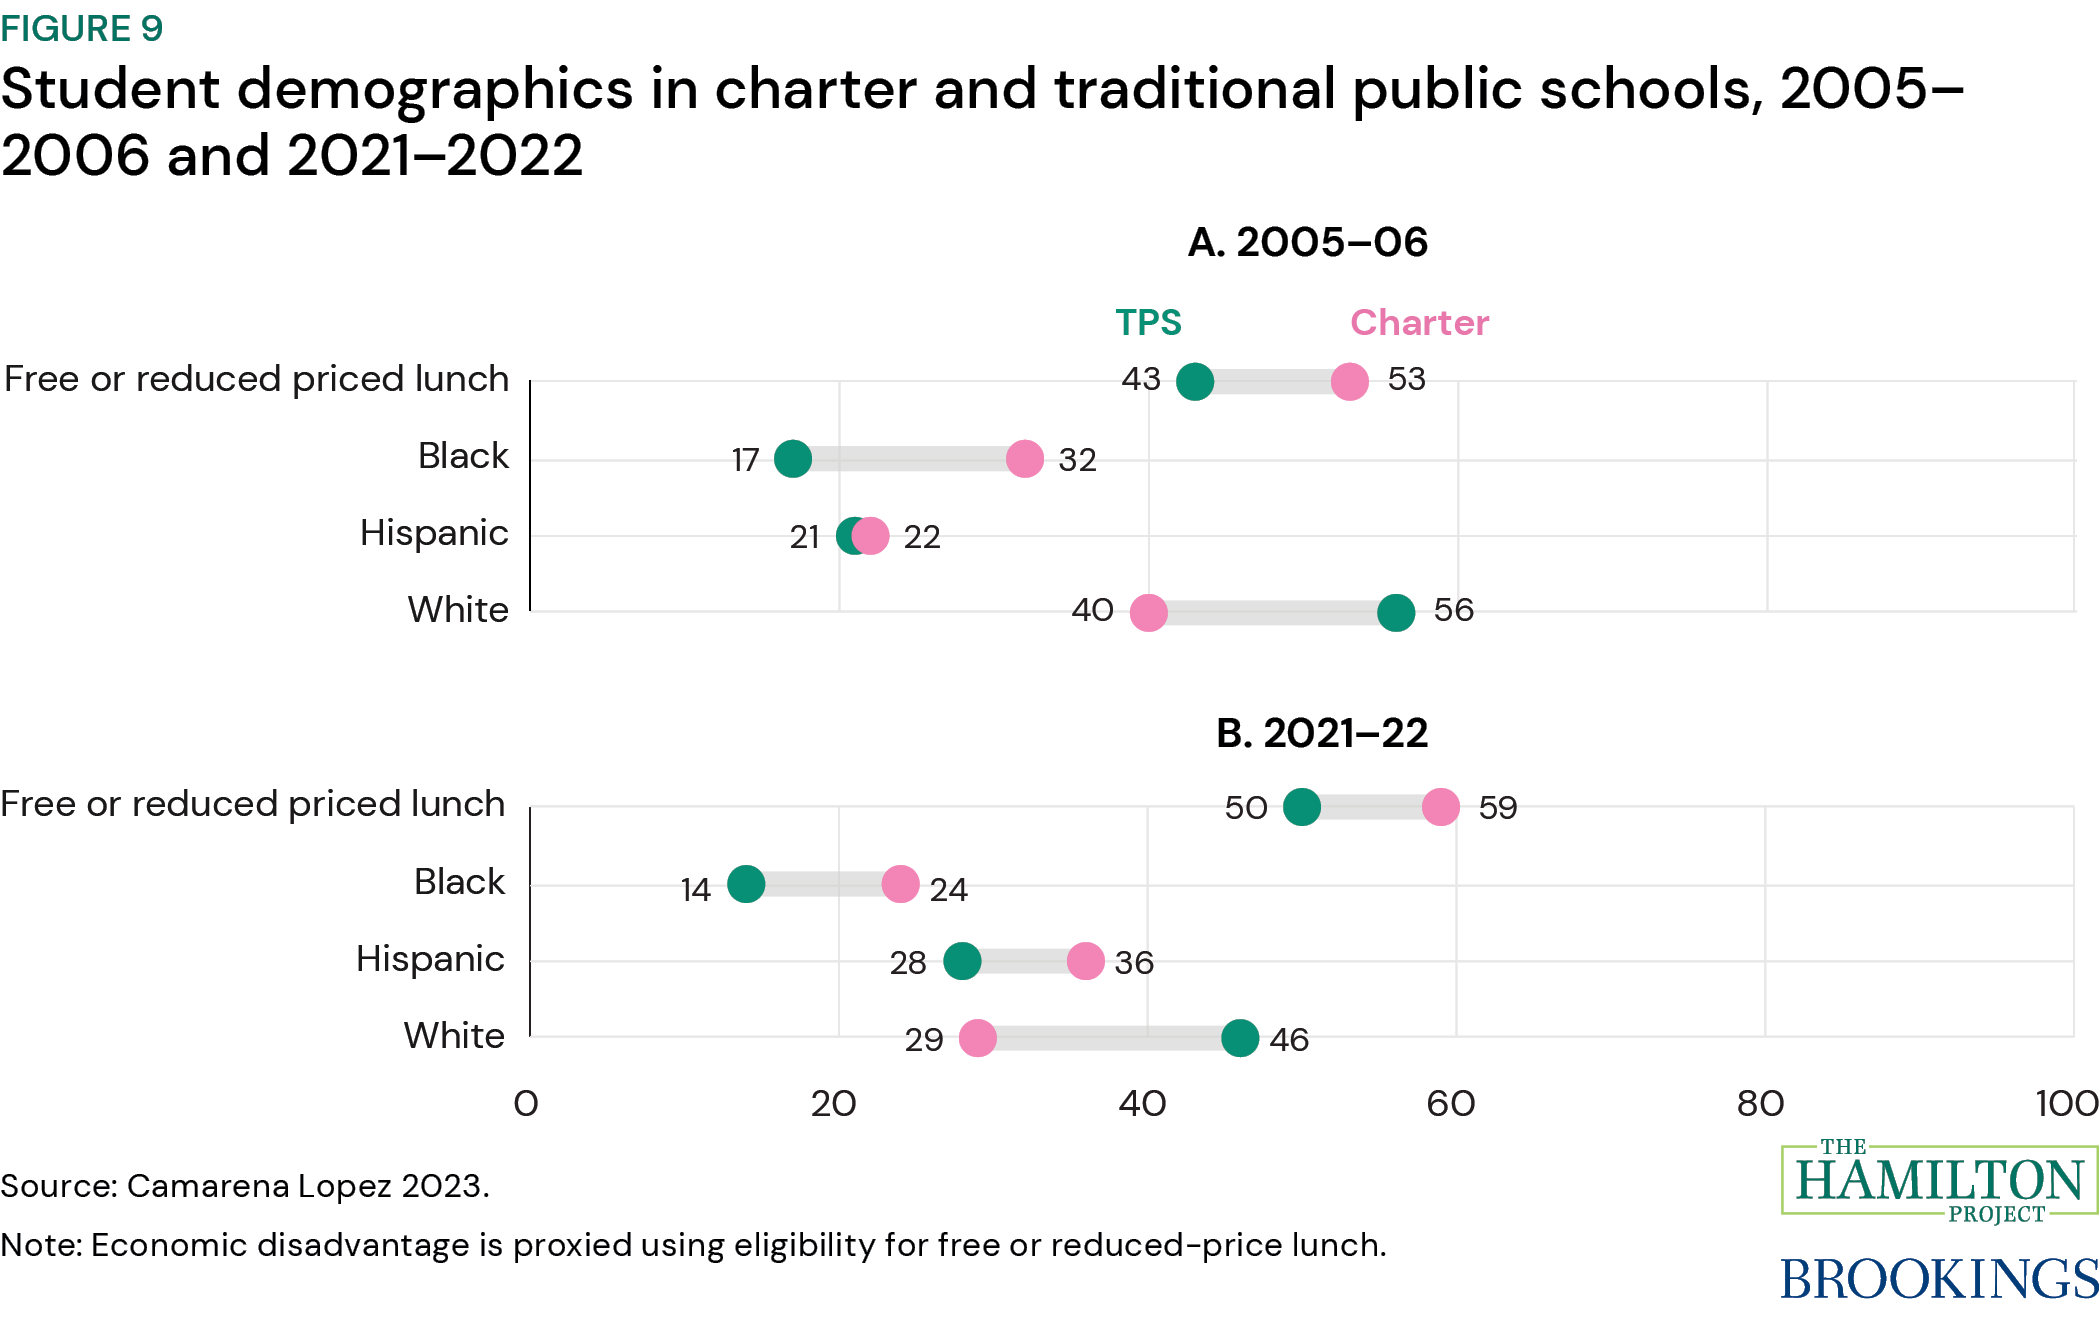 Figure 9: Student demographics in charter and traditional public schools, 2005-2006 and 2021-2022